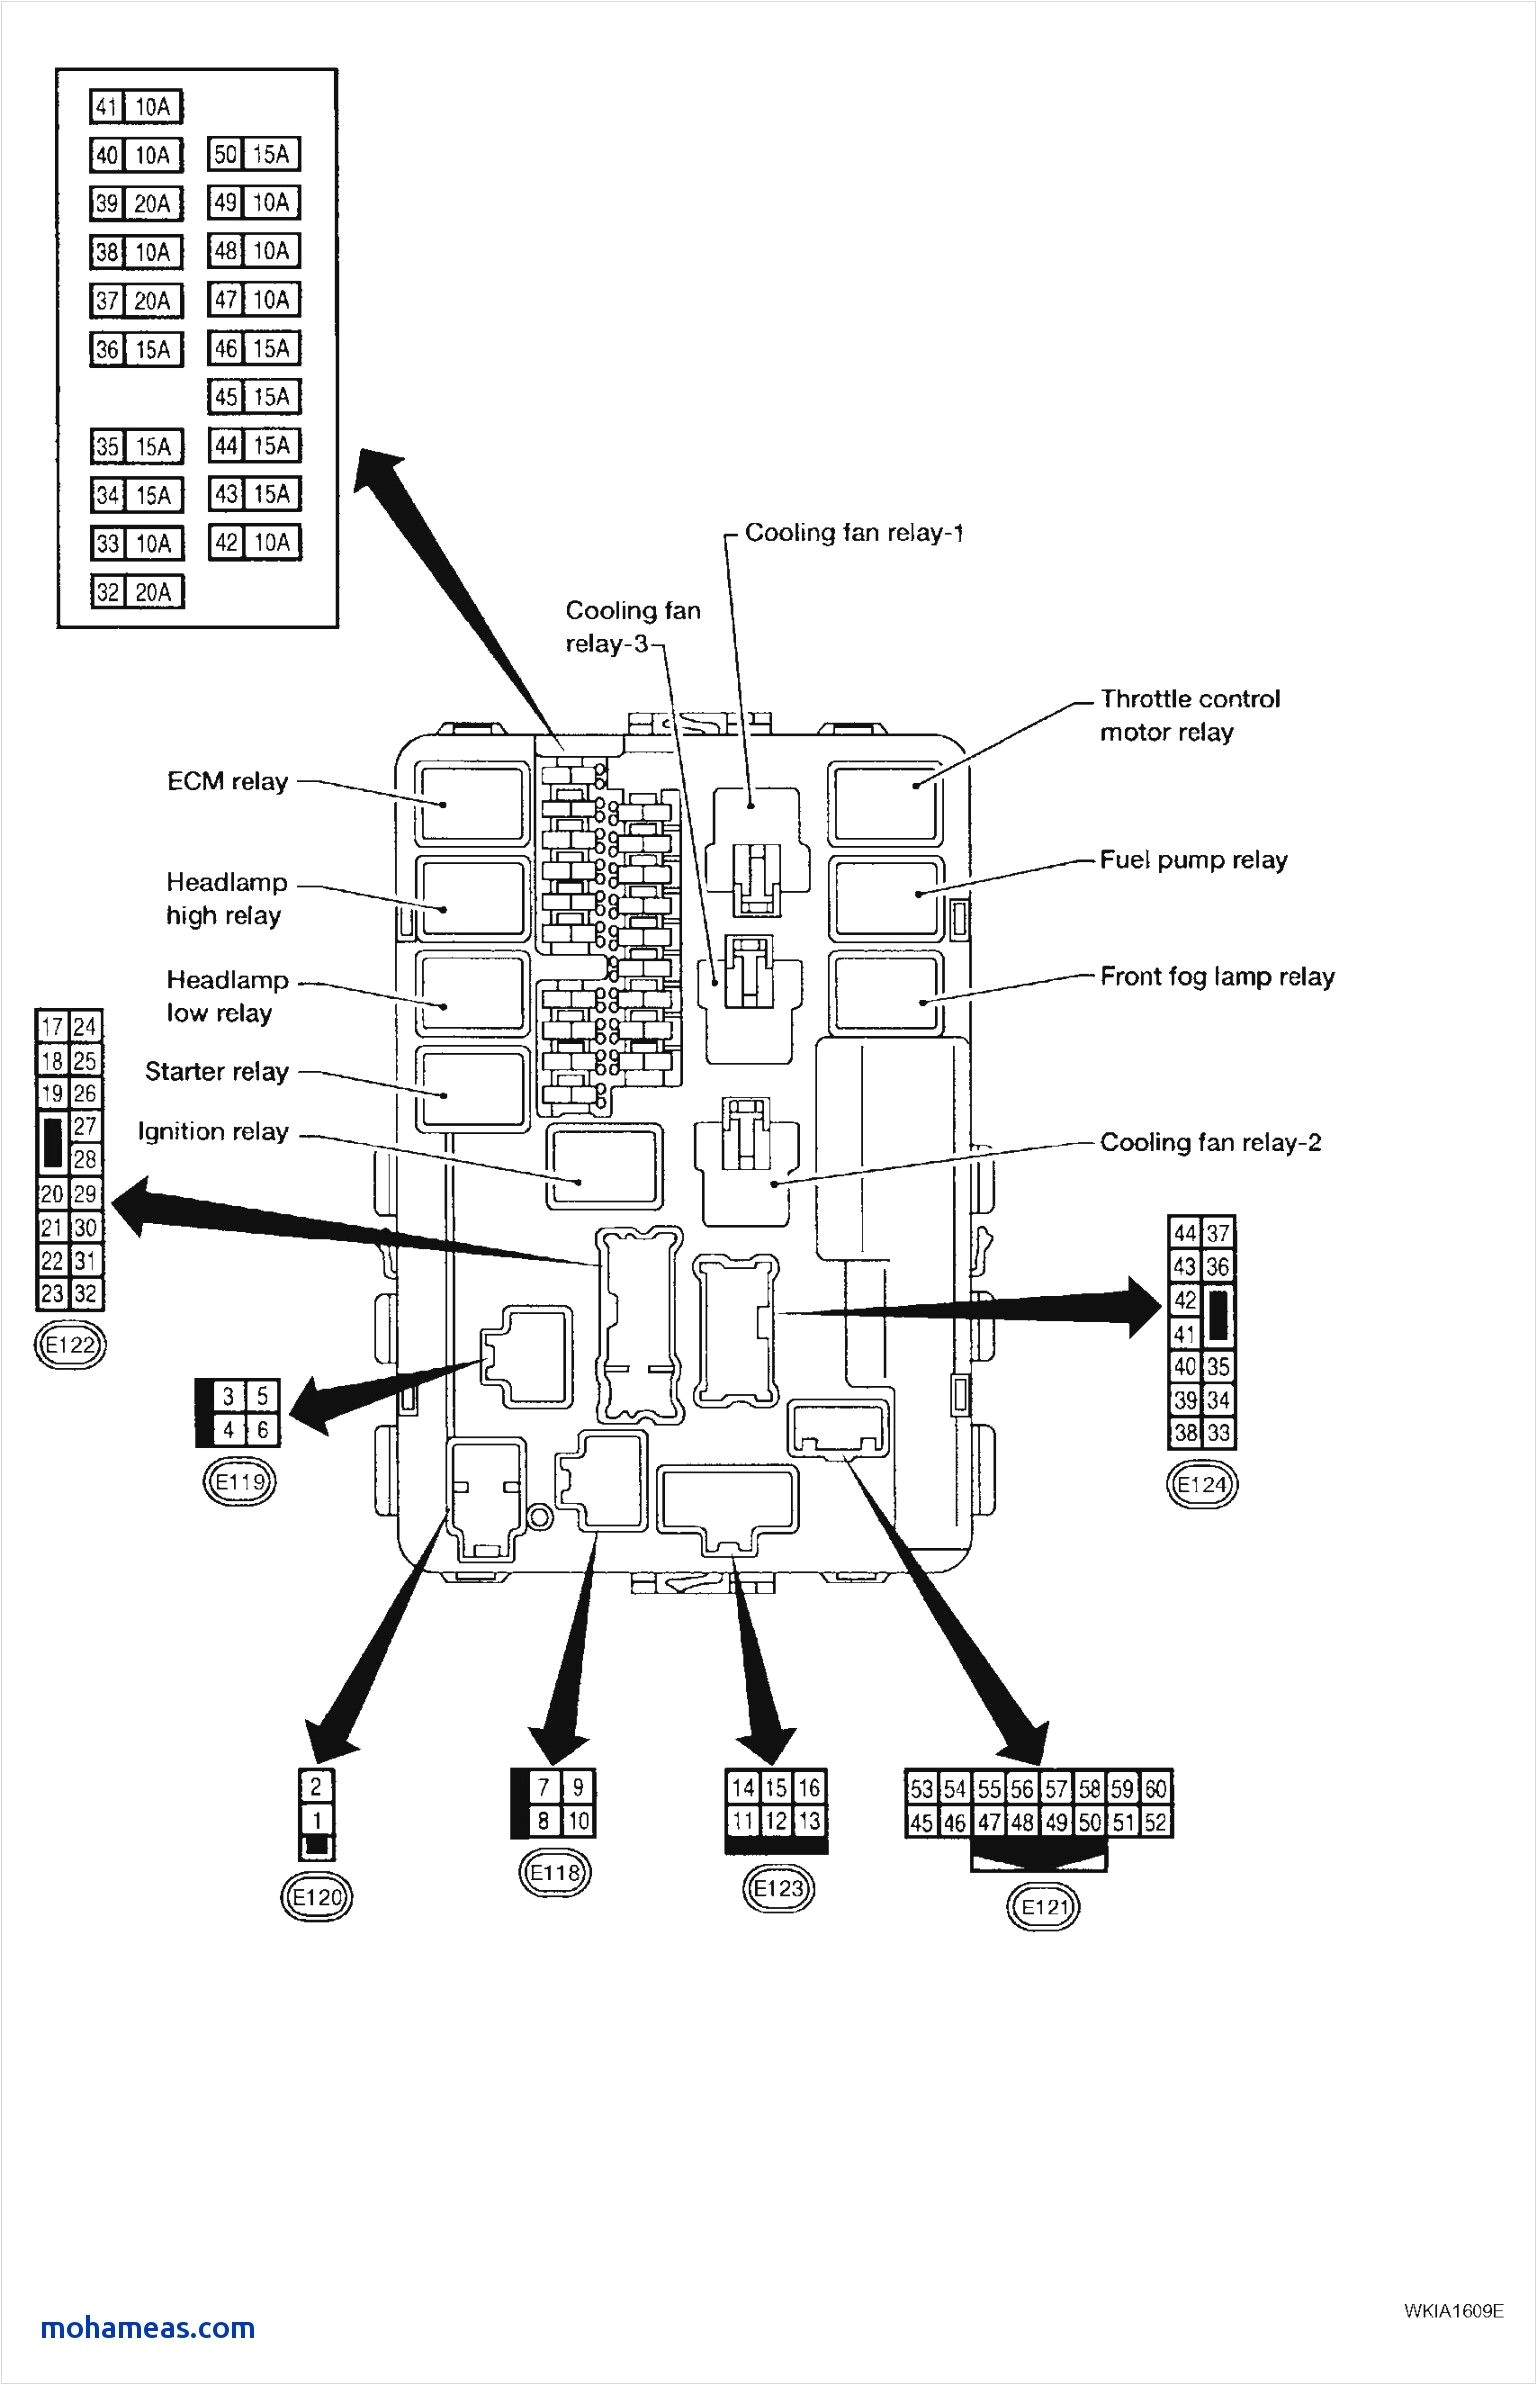 a diagram of fuses on 2007 nissan murano wiring diagram mix 04 nissan murano fuse box